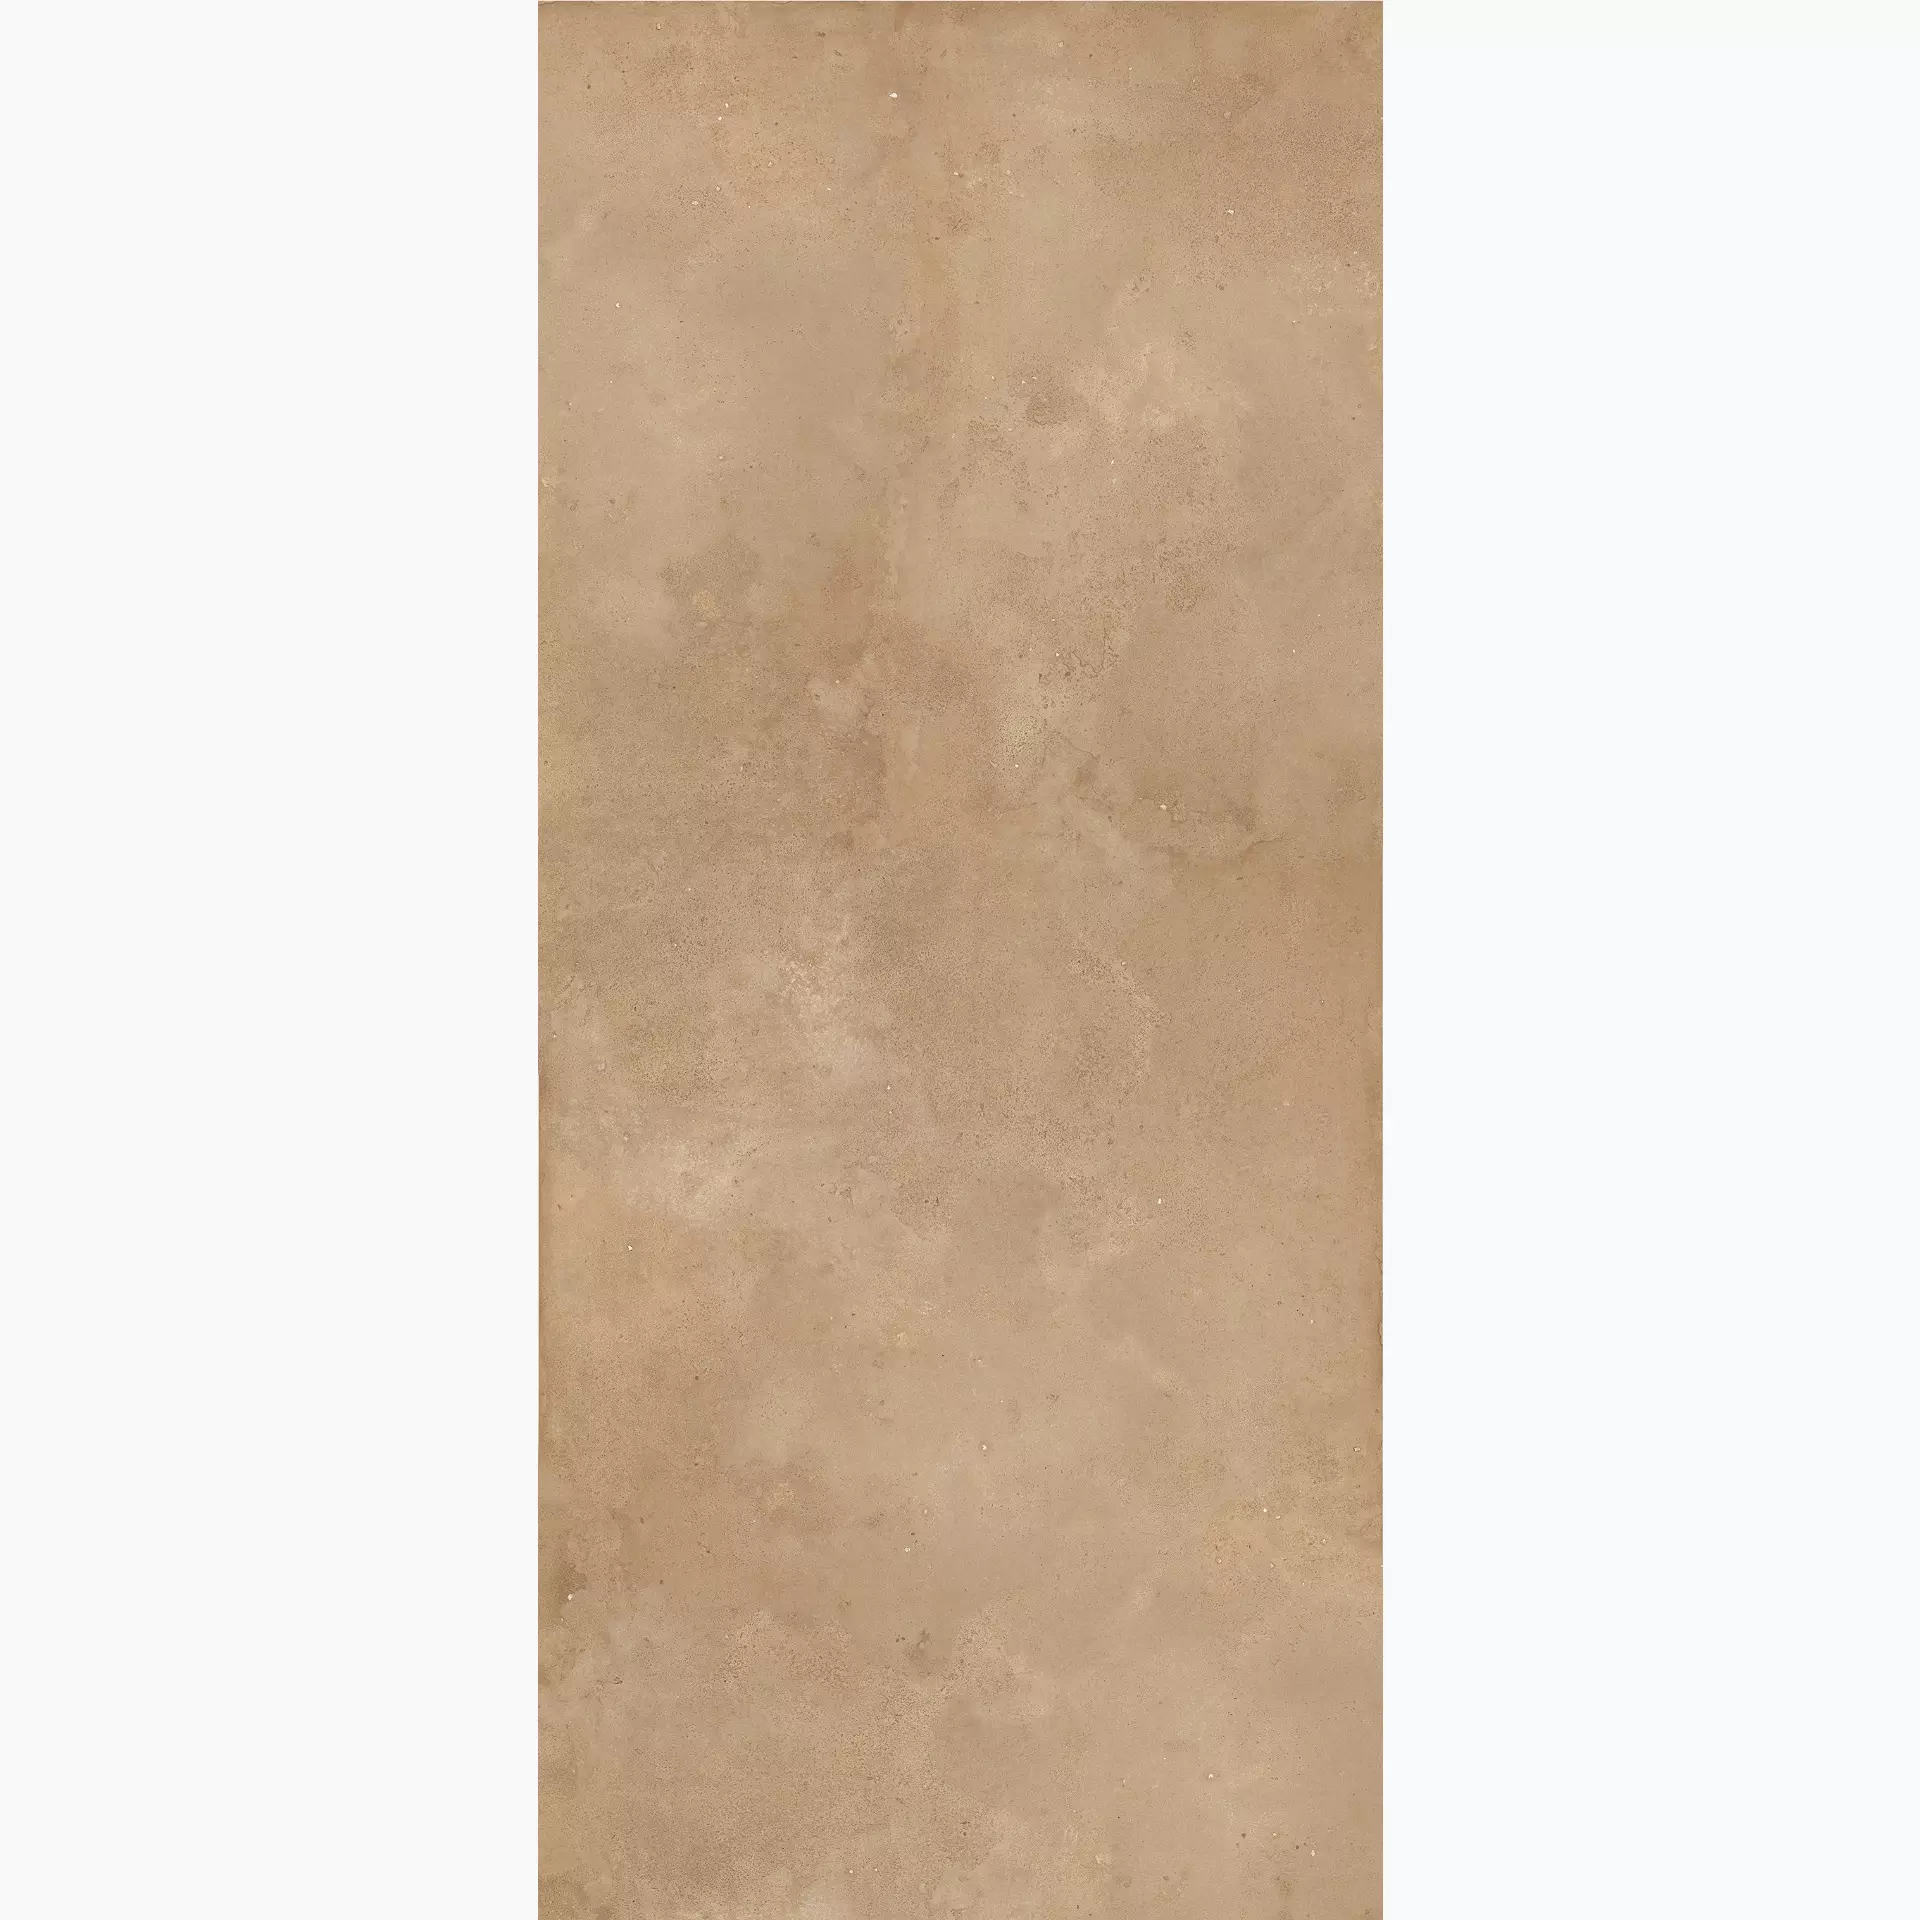 Fondovalle Pigmento Oro Natural PGM035 120x278cm rectified 6,5mm